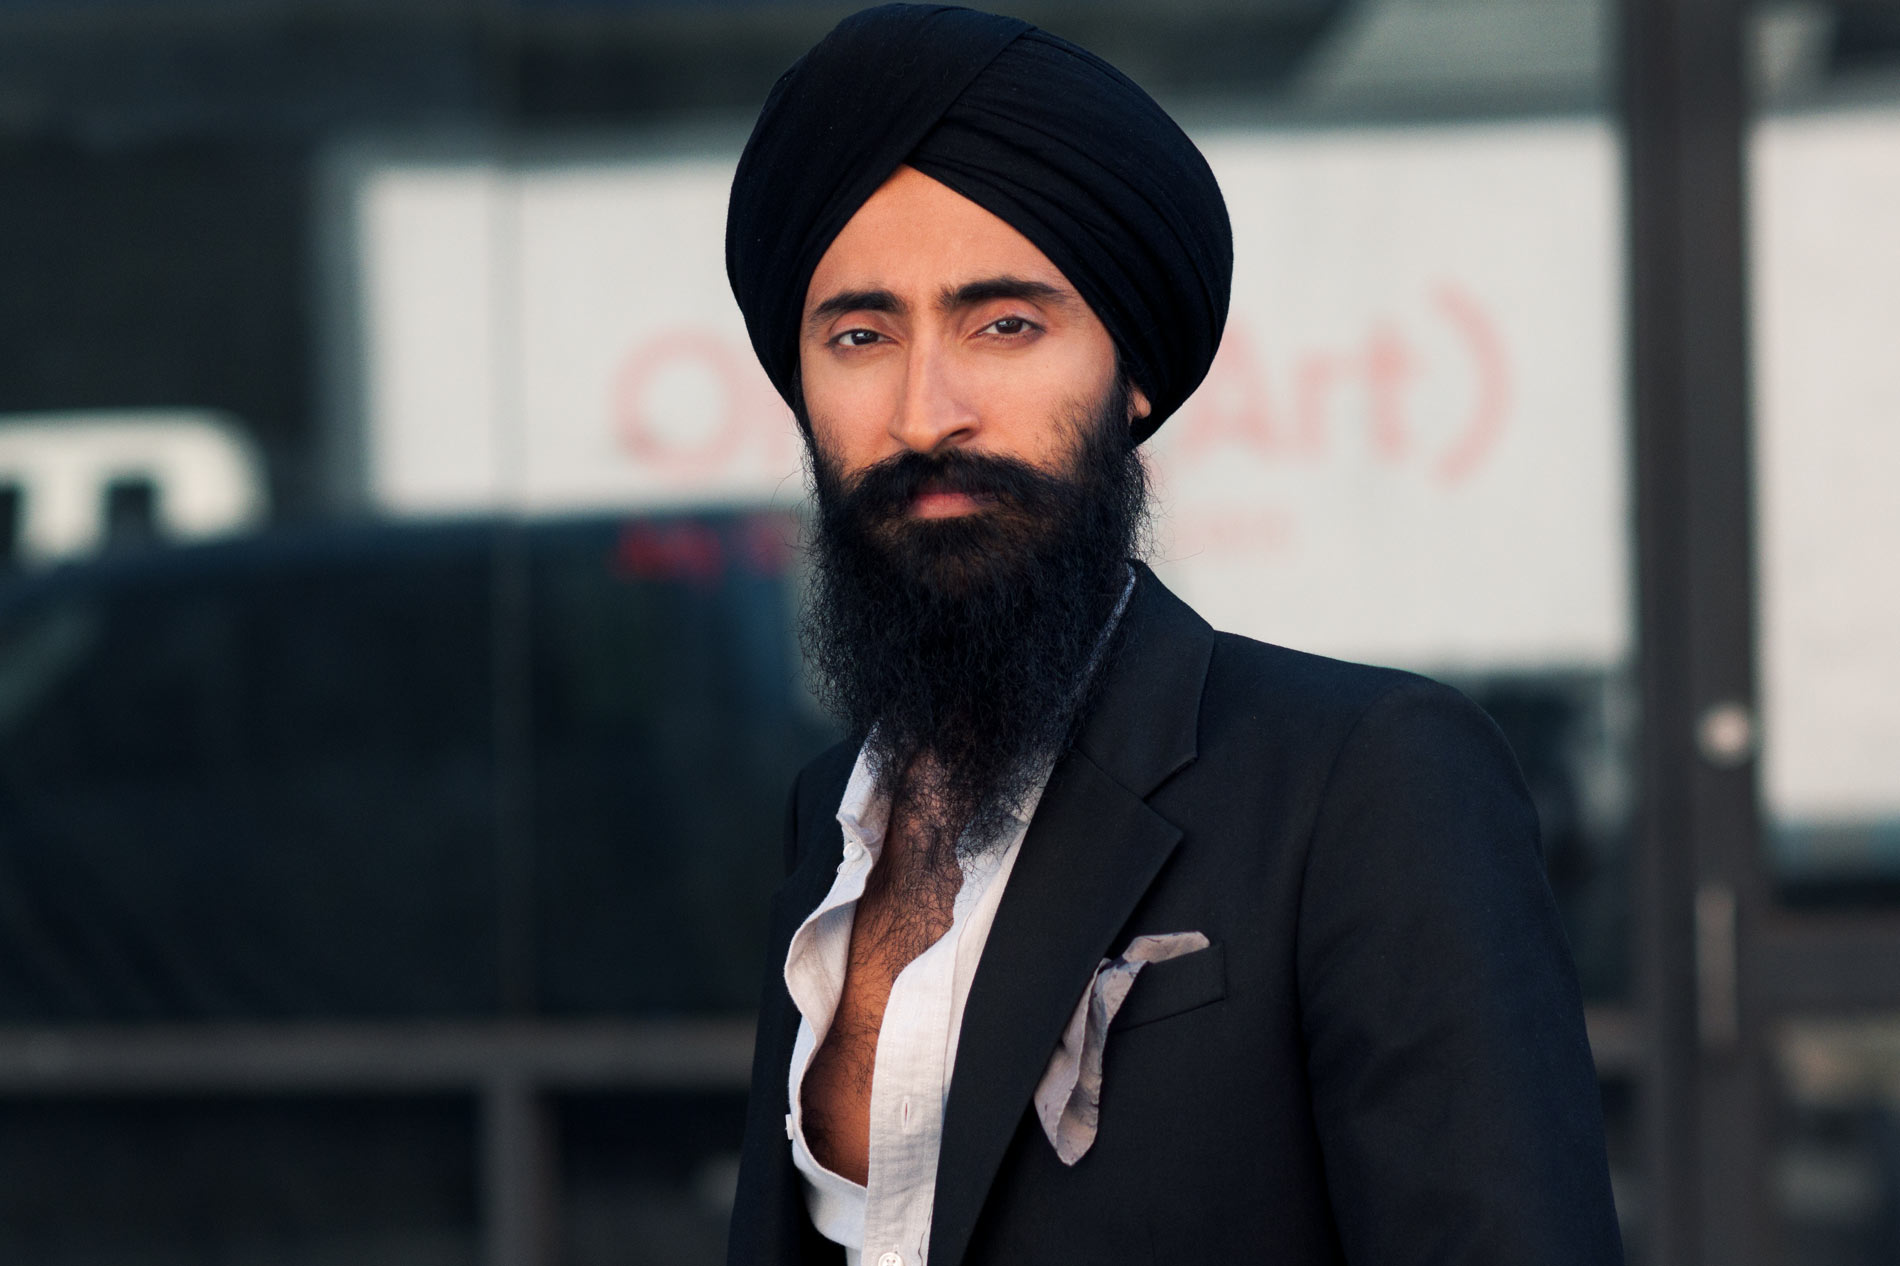 Sikh actor Waris Ahluwalia barred from boarding plane after refusing to remove turban